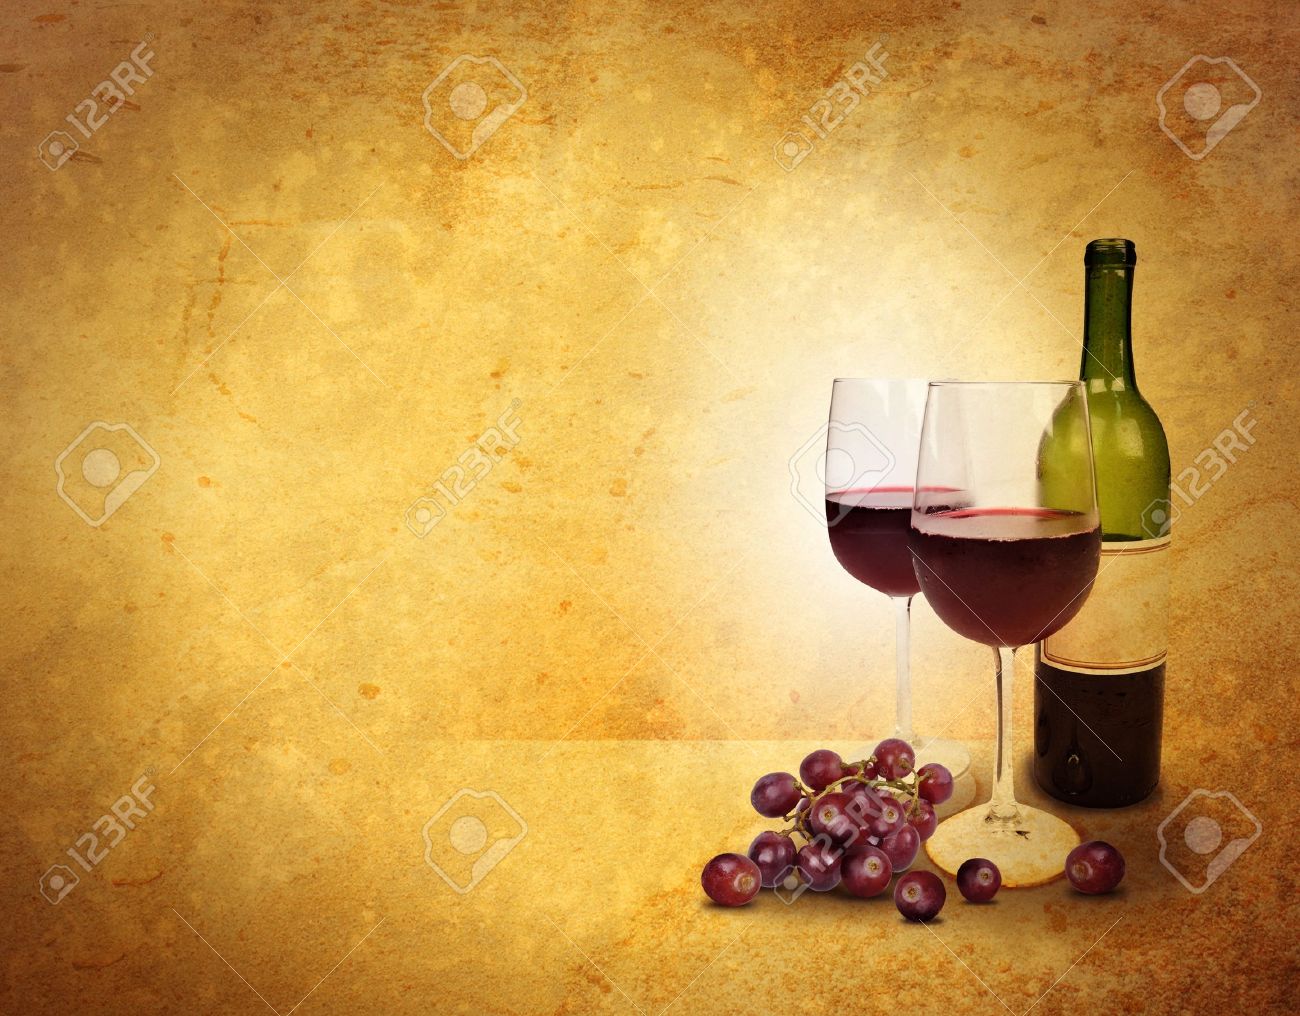 Two Wine Glasses And A Bottle Are On An Old Textured Background